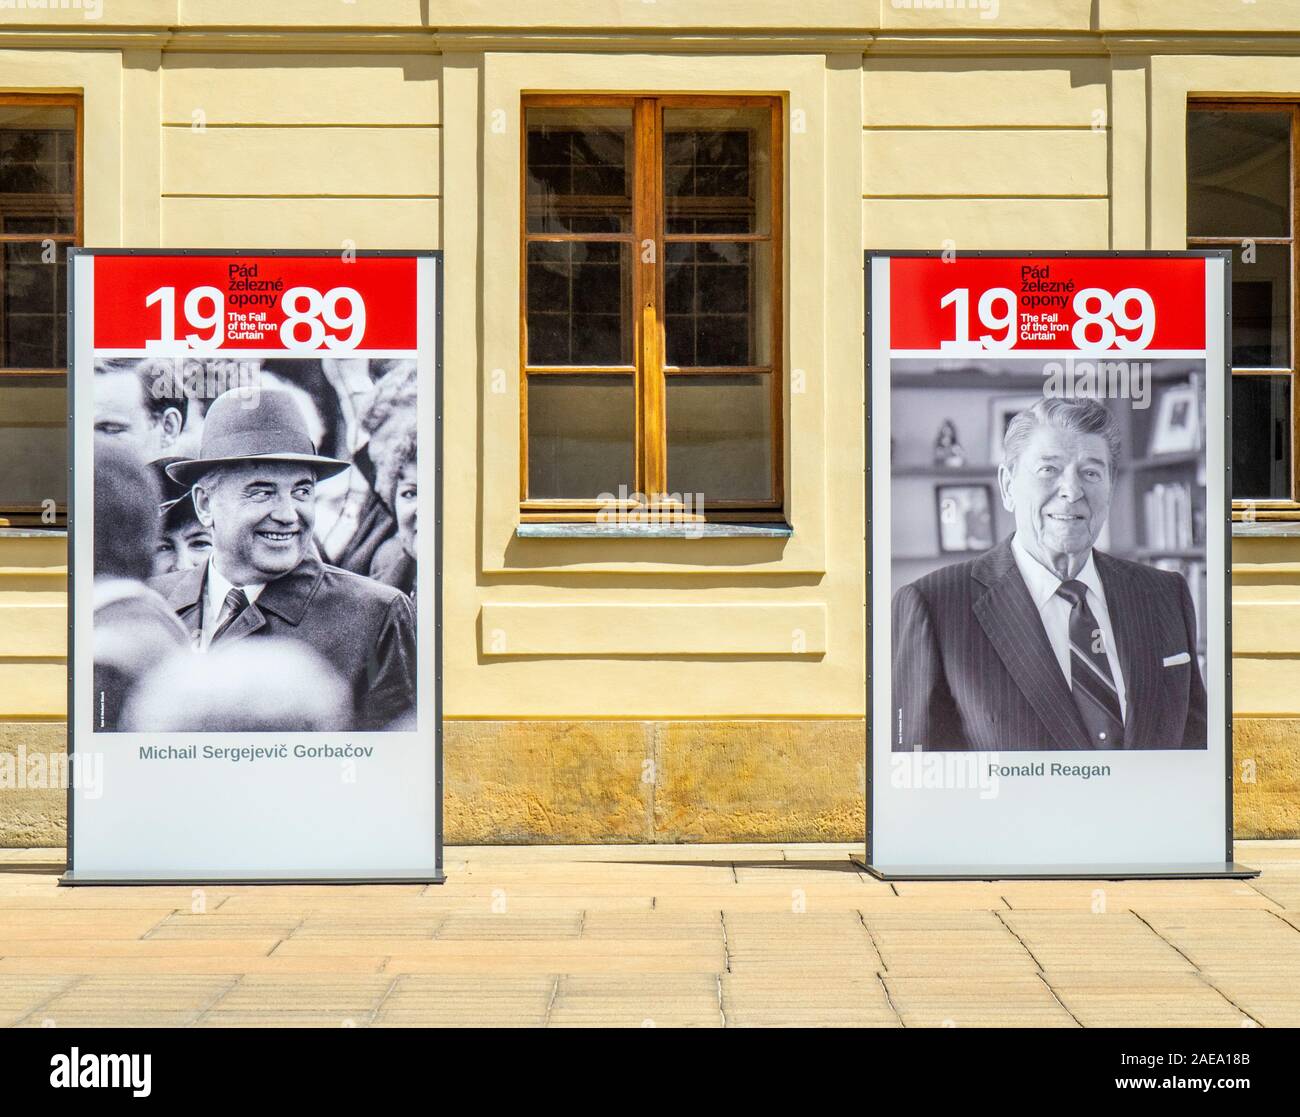 First Courtyard posters of world leaders involved in 1989 fall of the Iron Curtain exhibition at Prague Castle Complex Prague Czech Republic. Stock Photo